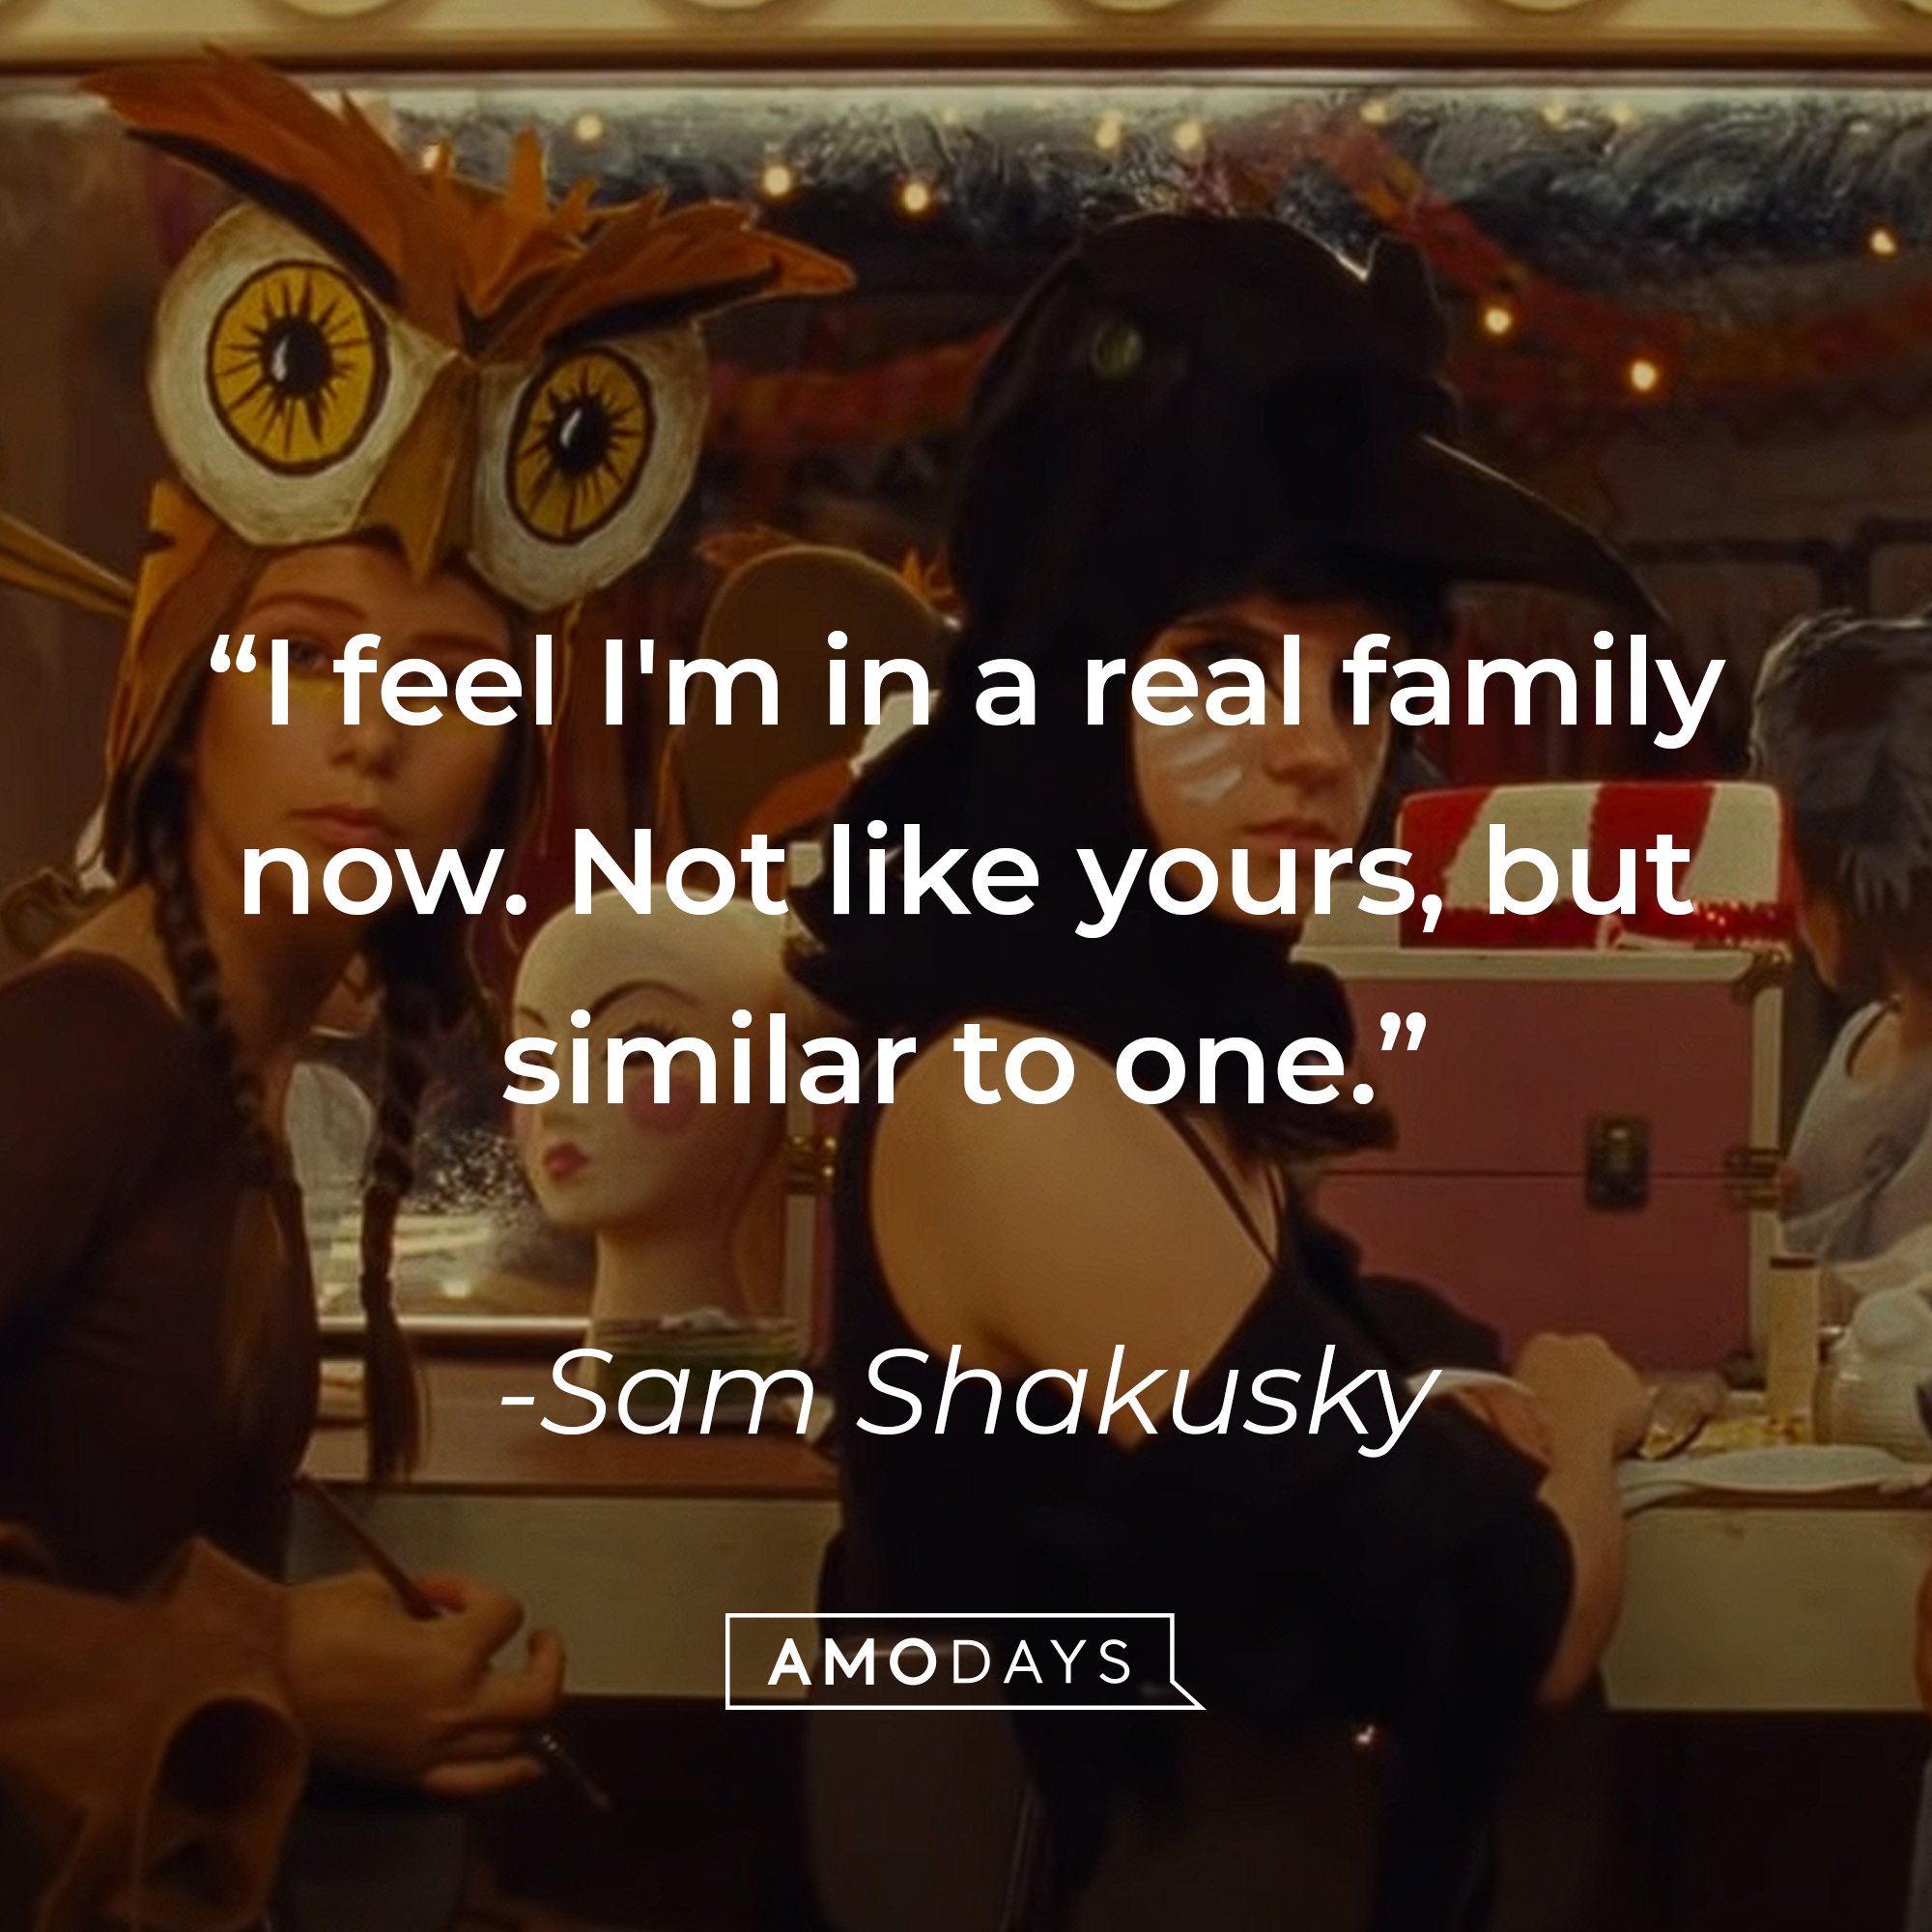 Sam Shakusky's quote: "I feel I'm in a real family now. Not like yours, but similar to one." | Image: AmoDays